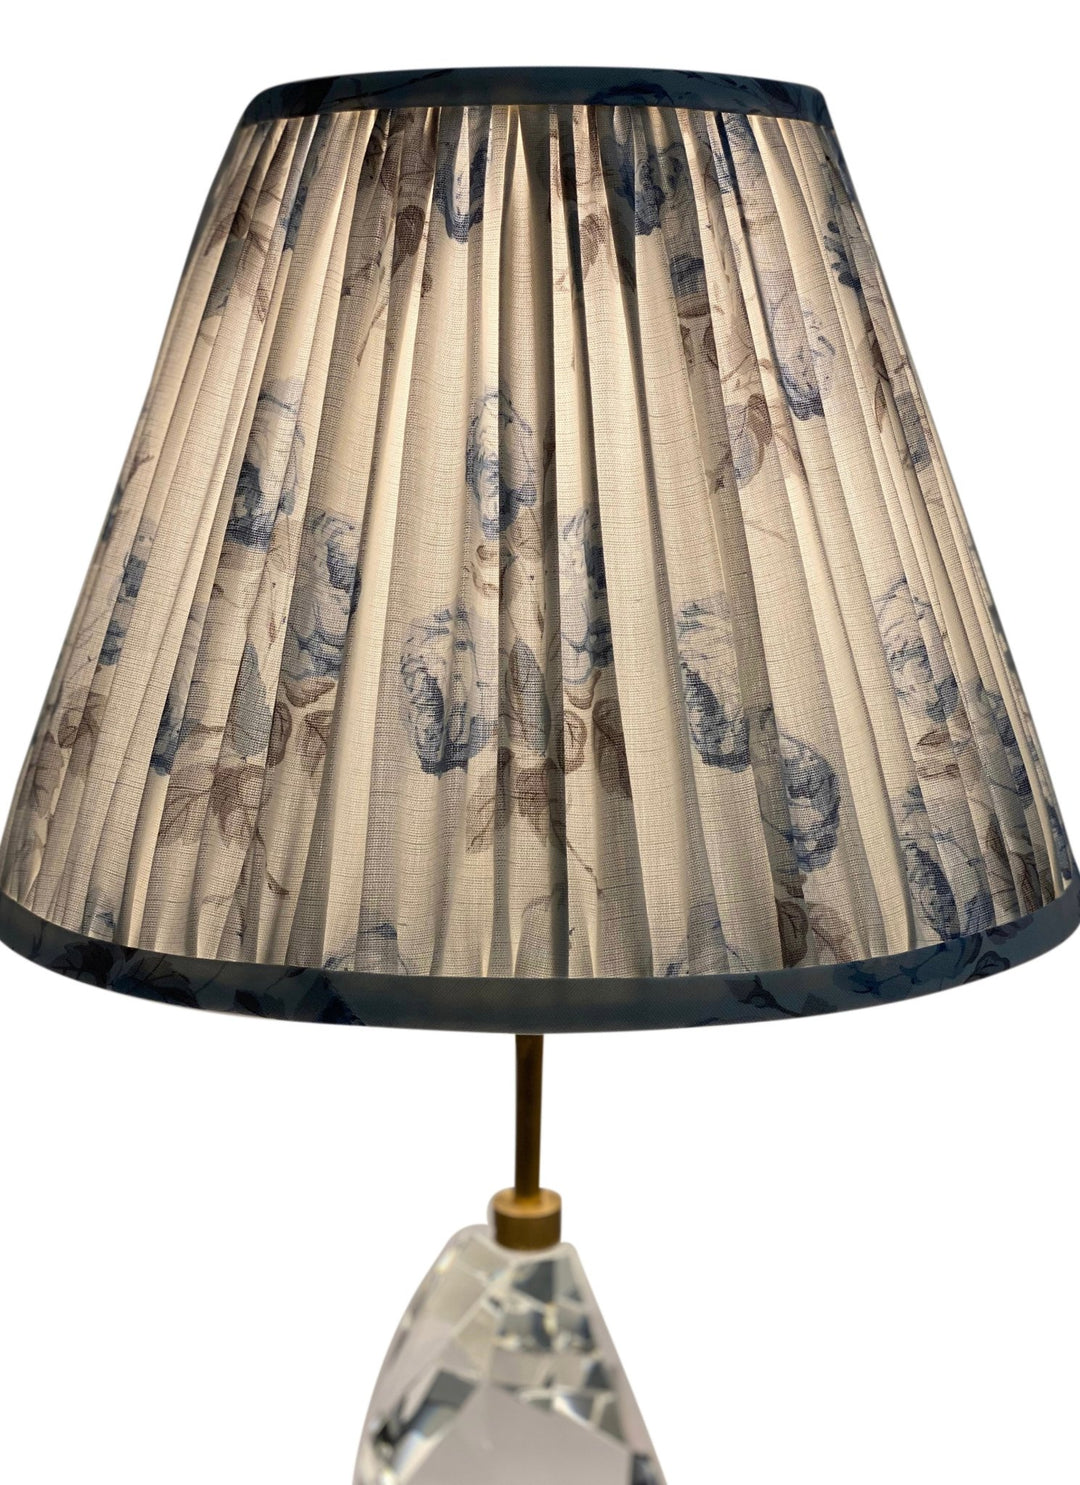 Bowood by Colefax and Fowler Gathered Lampshades - Lux Lamp Shades